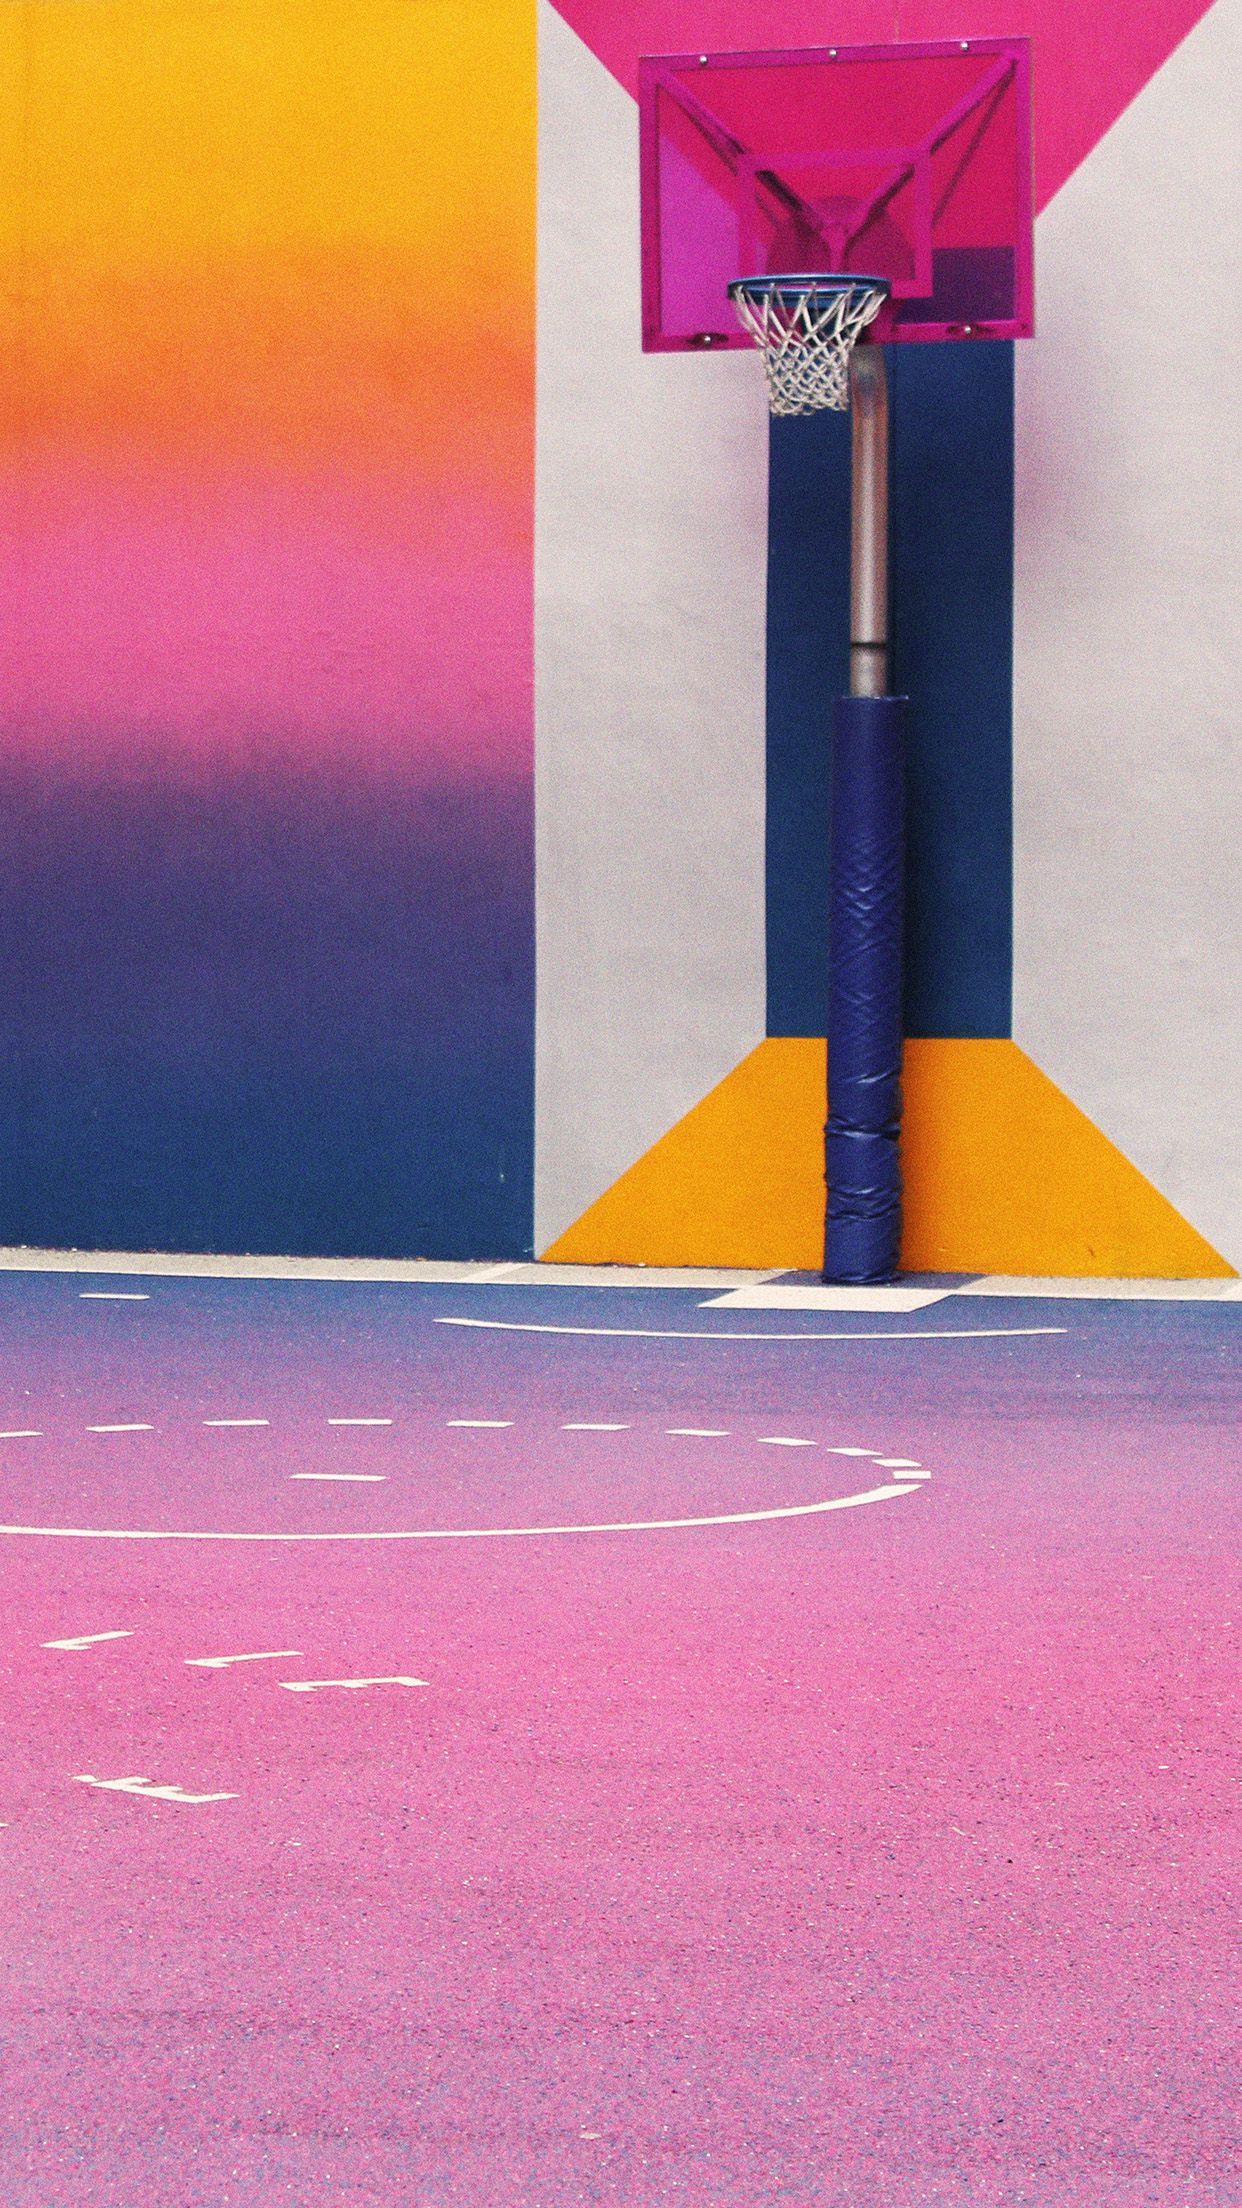 basketball court 1080P 2k 4k HD wallpapers backgrounds free download   Rare Gallery